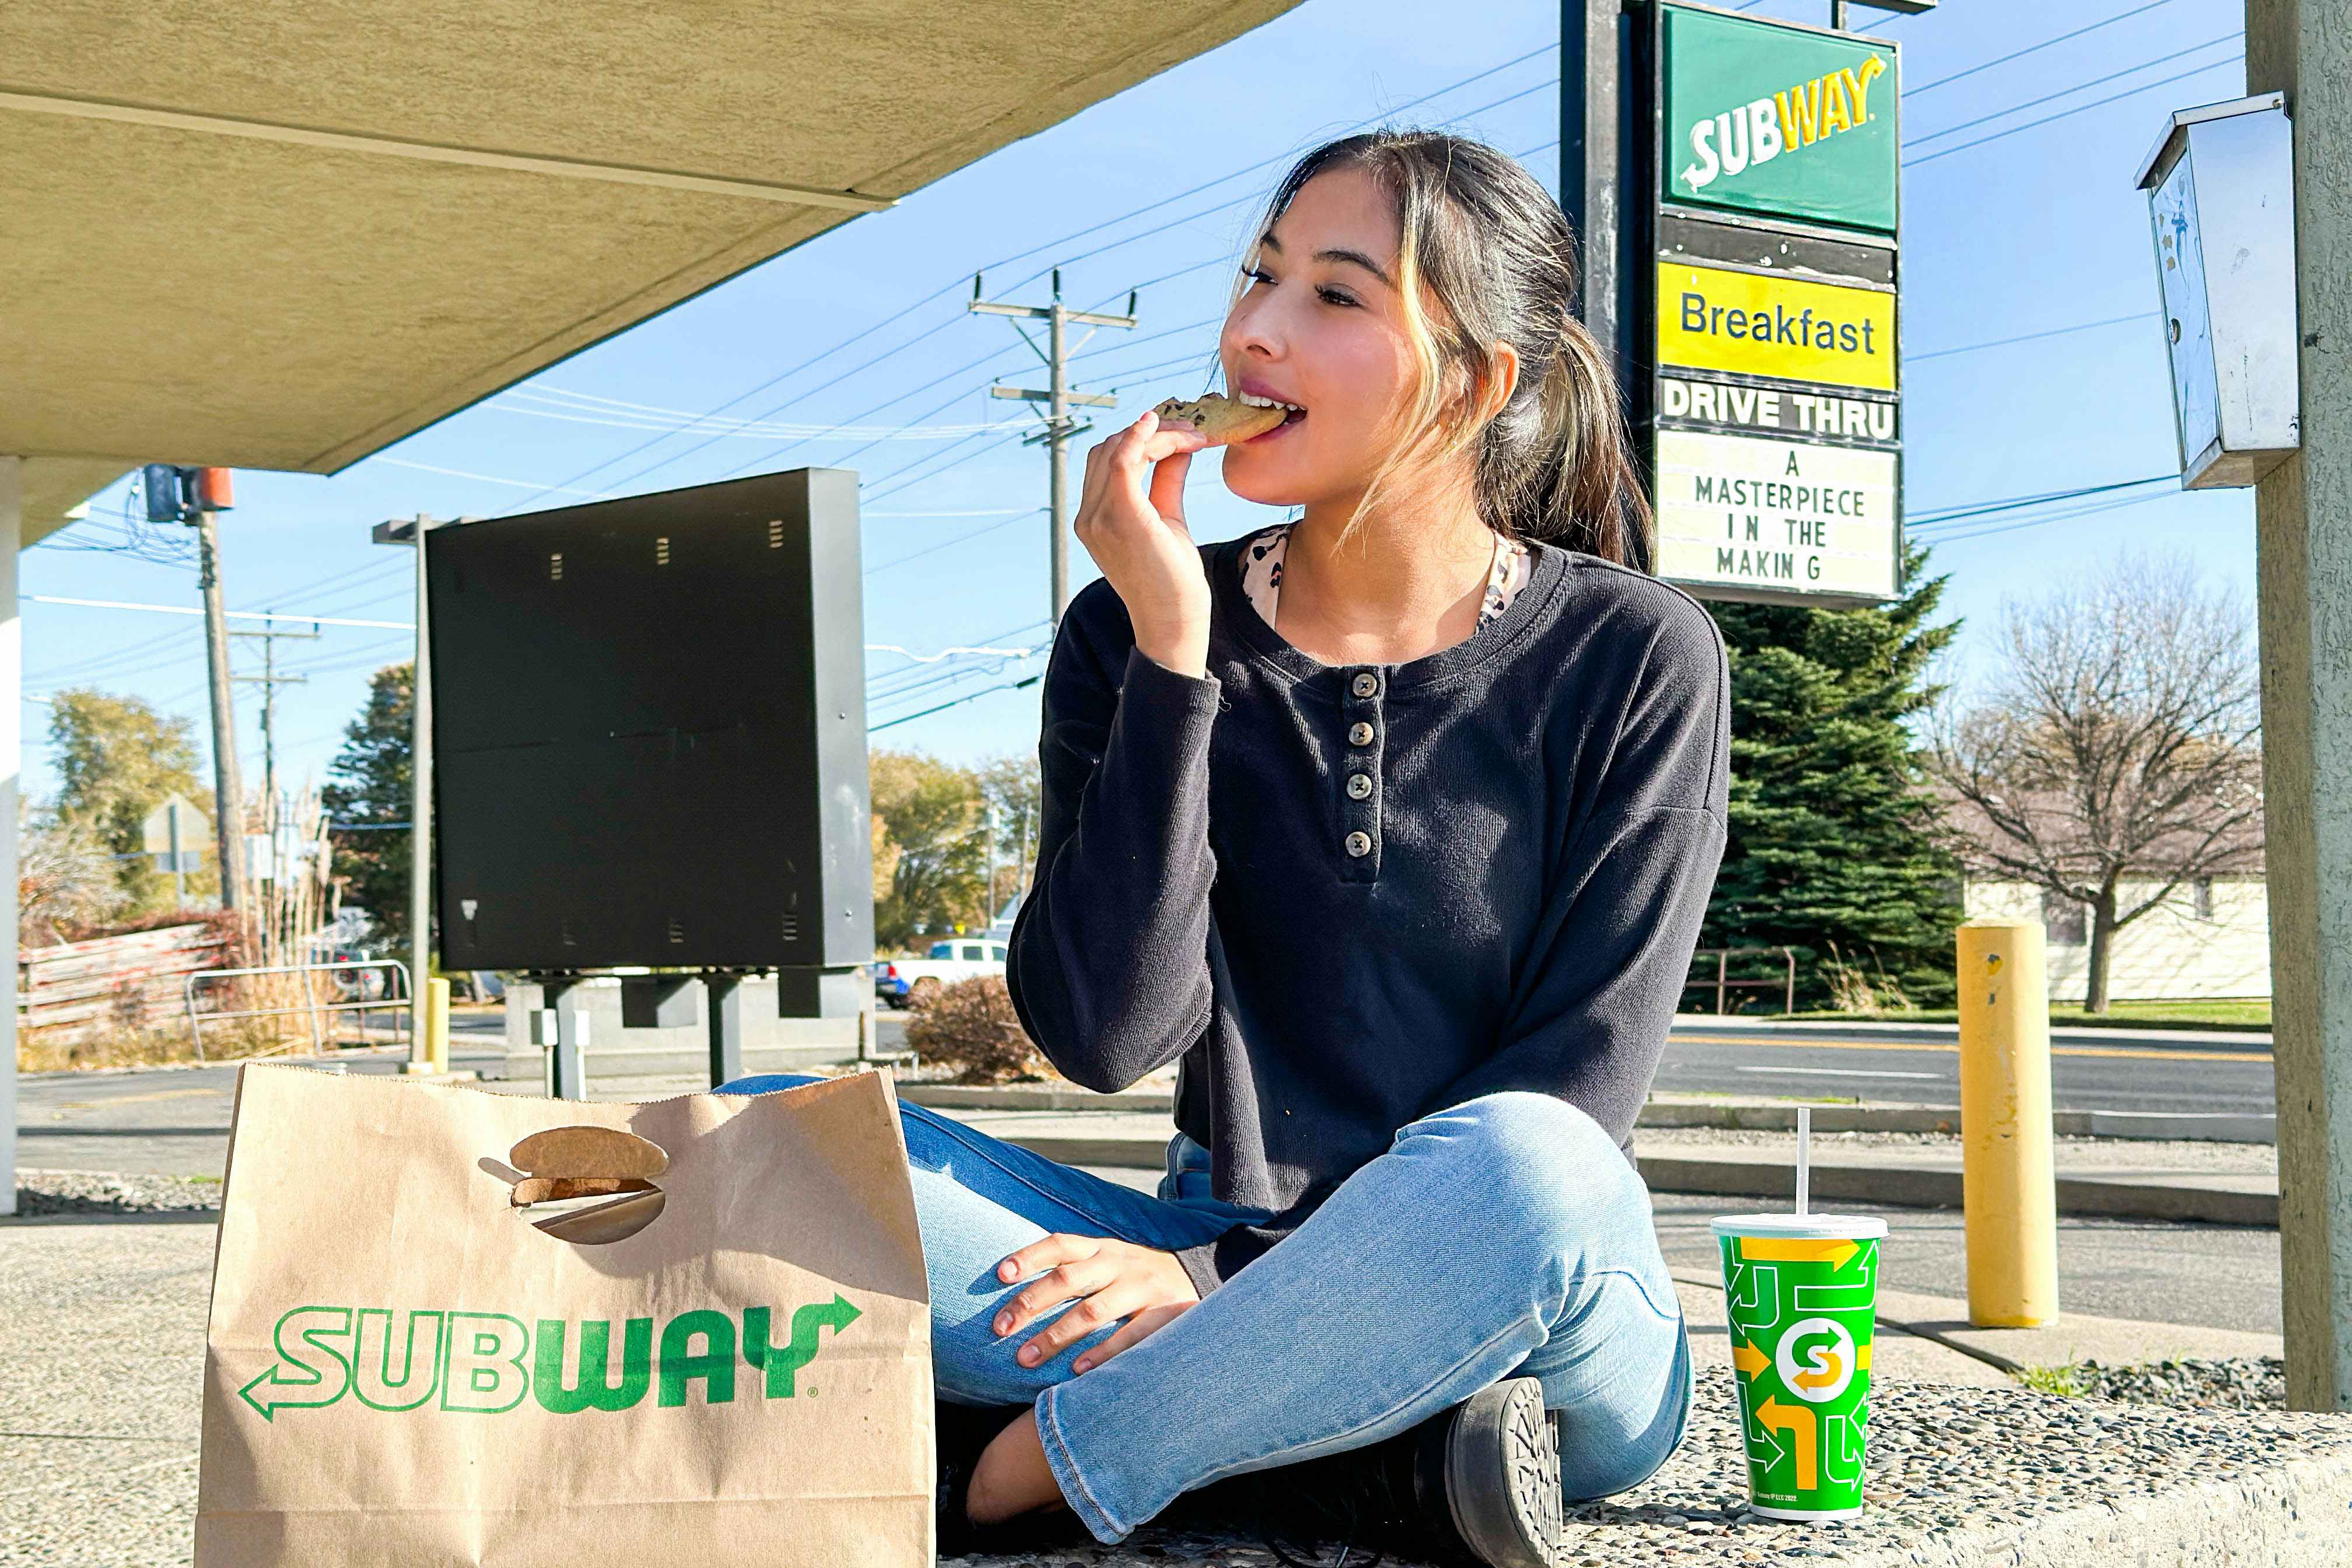 Do Subway sandwich coupons really work? Here's why not 